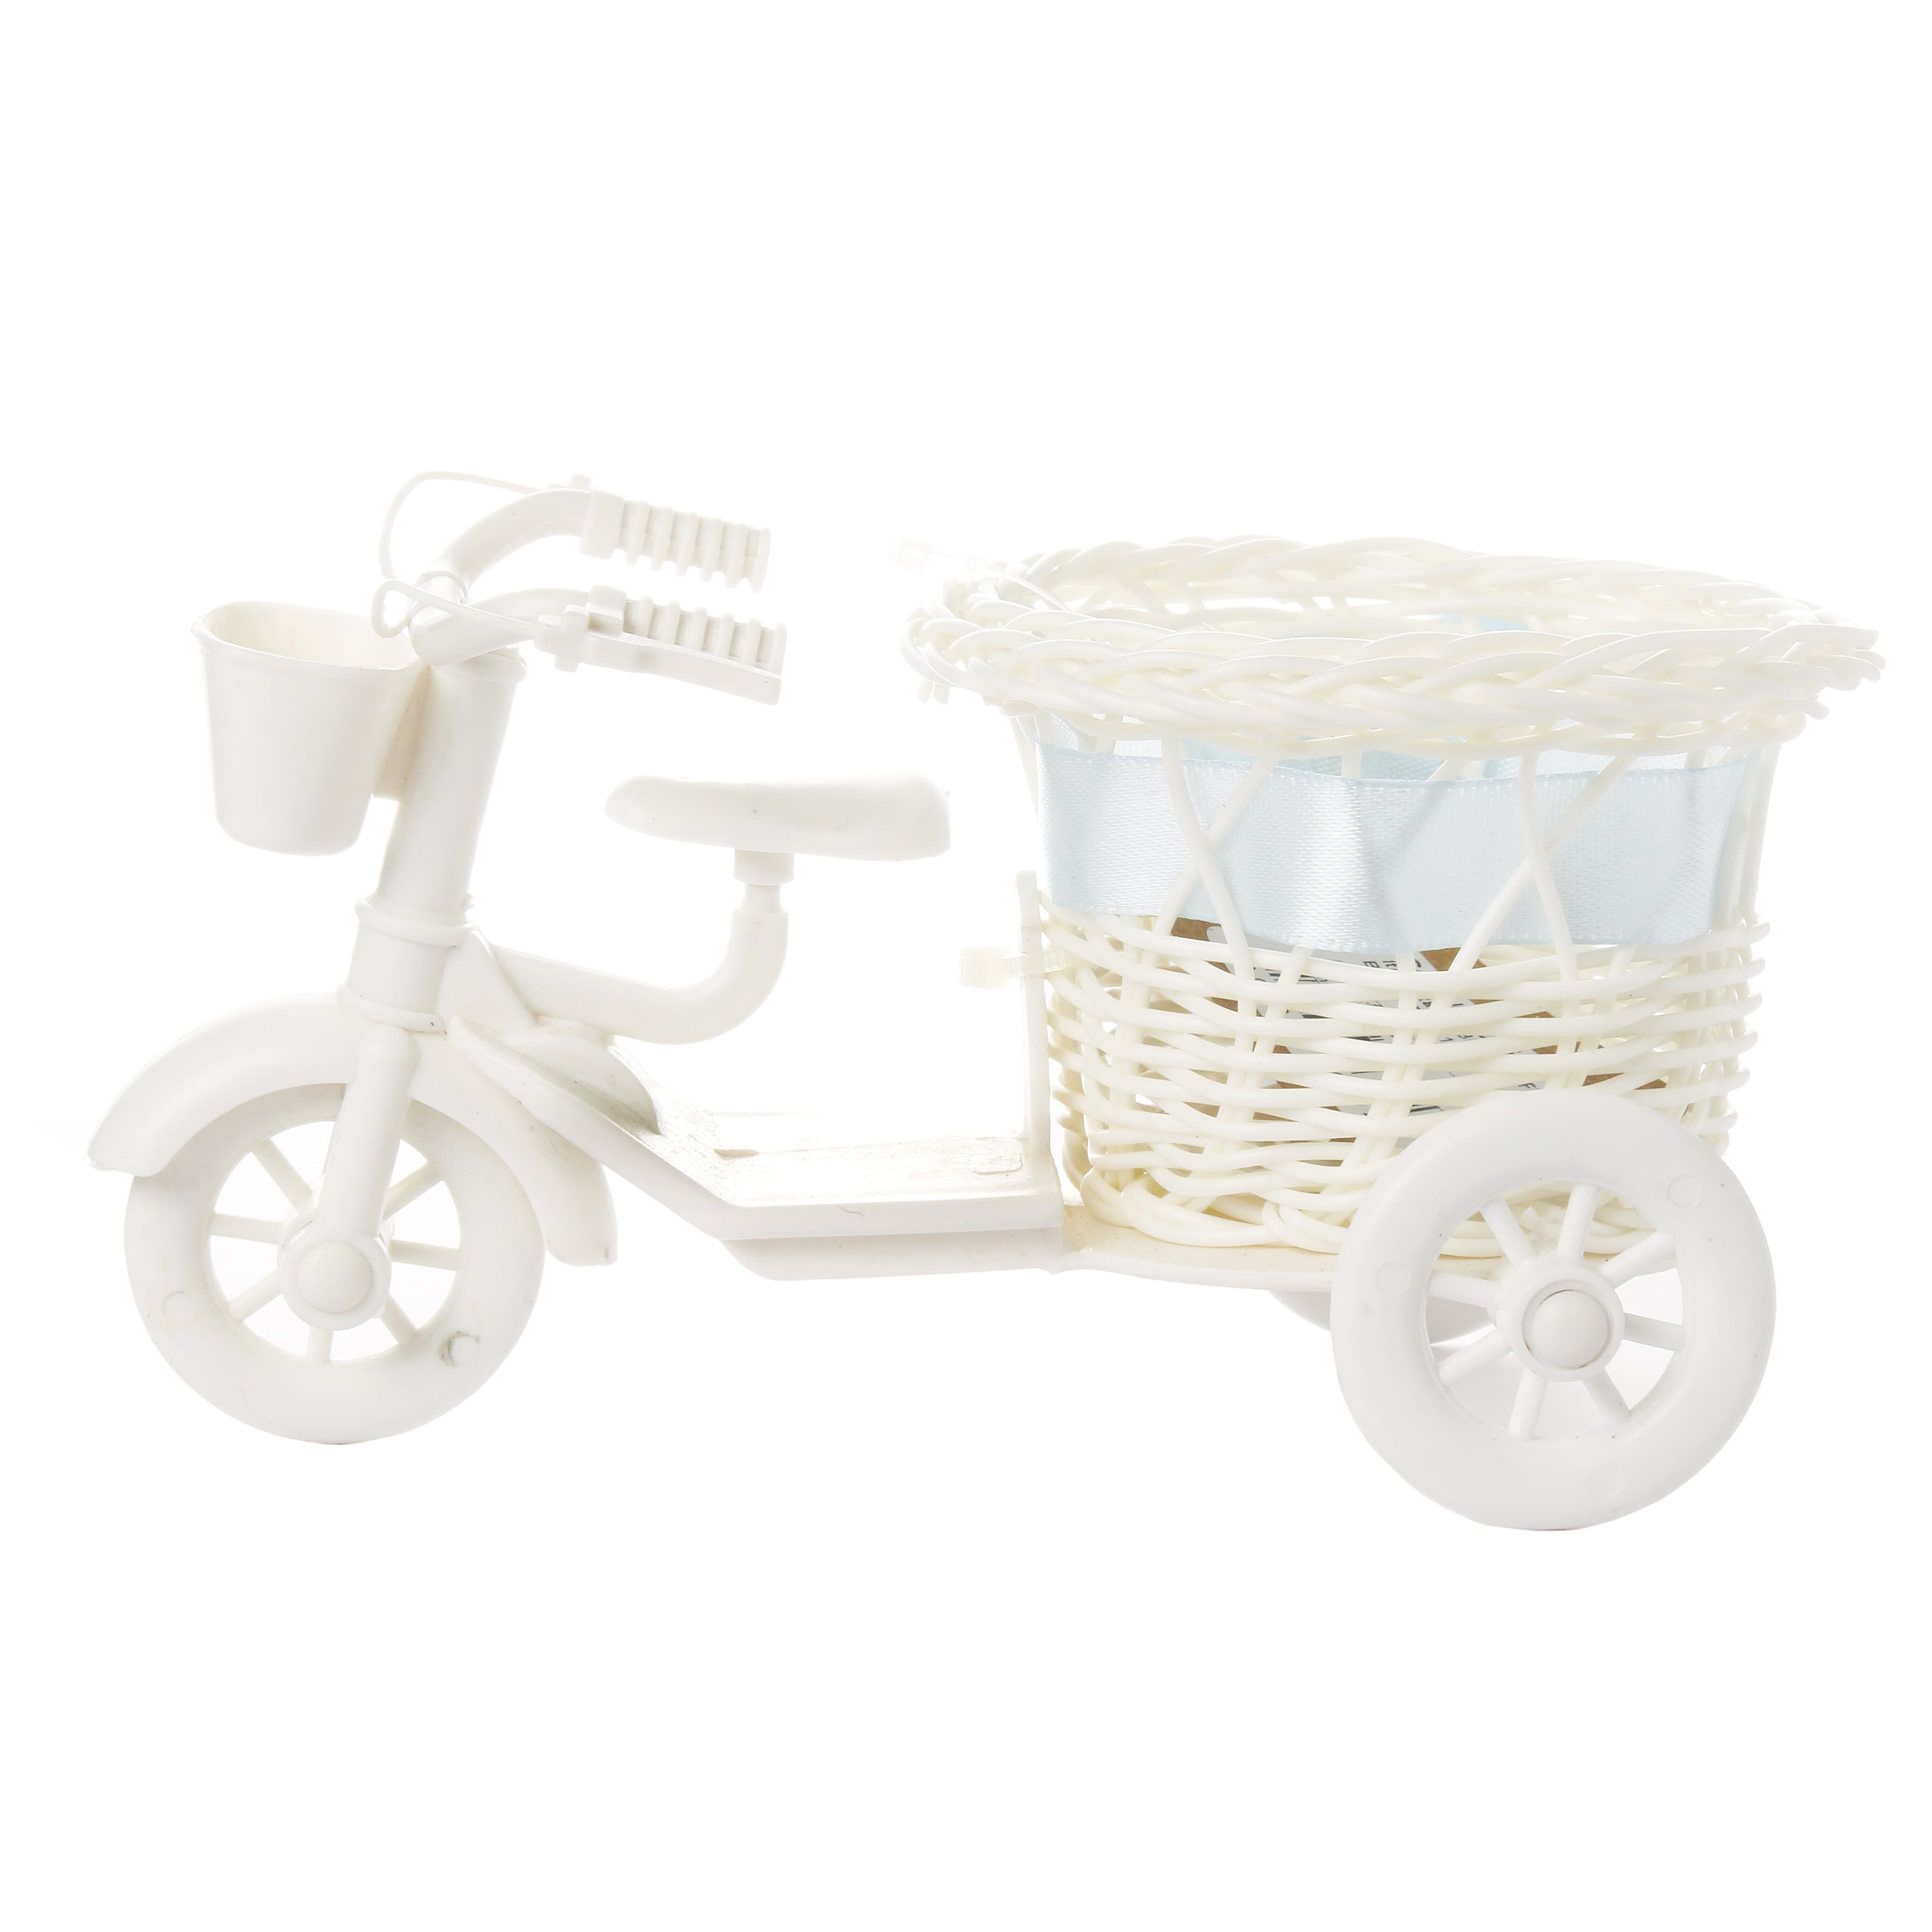 Rattan Bicycle With Flower Basket Small - Assorted